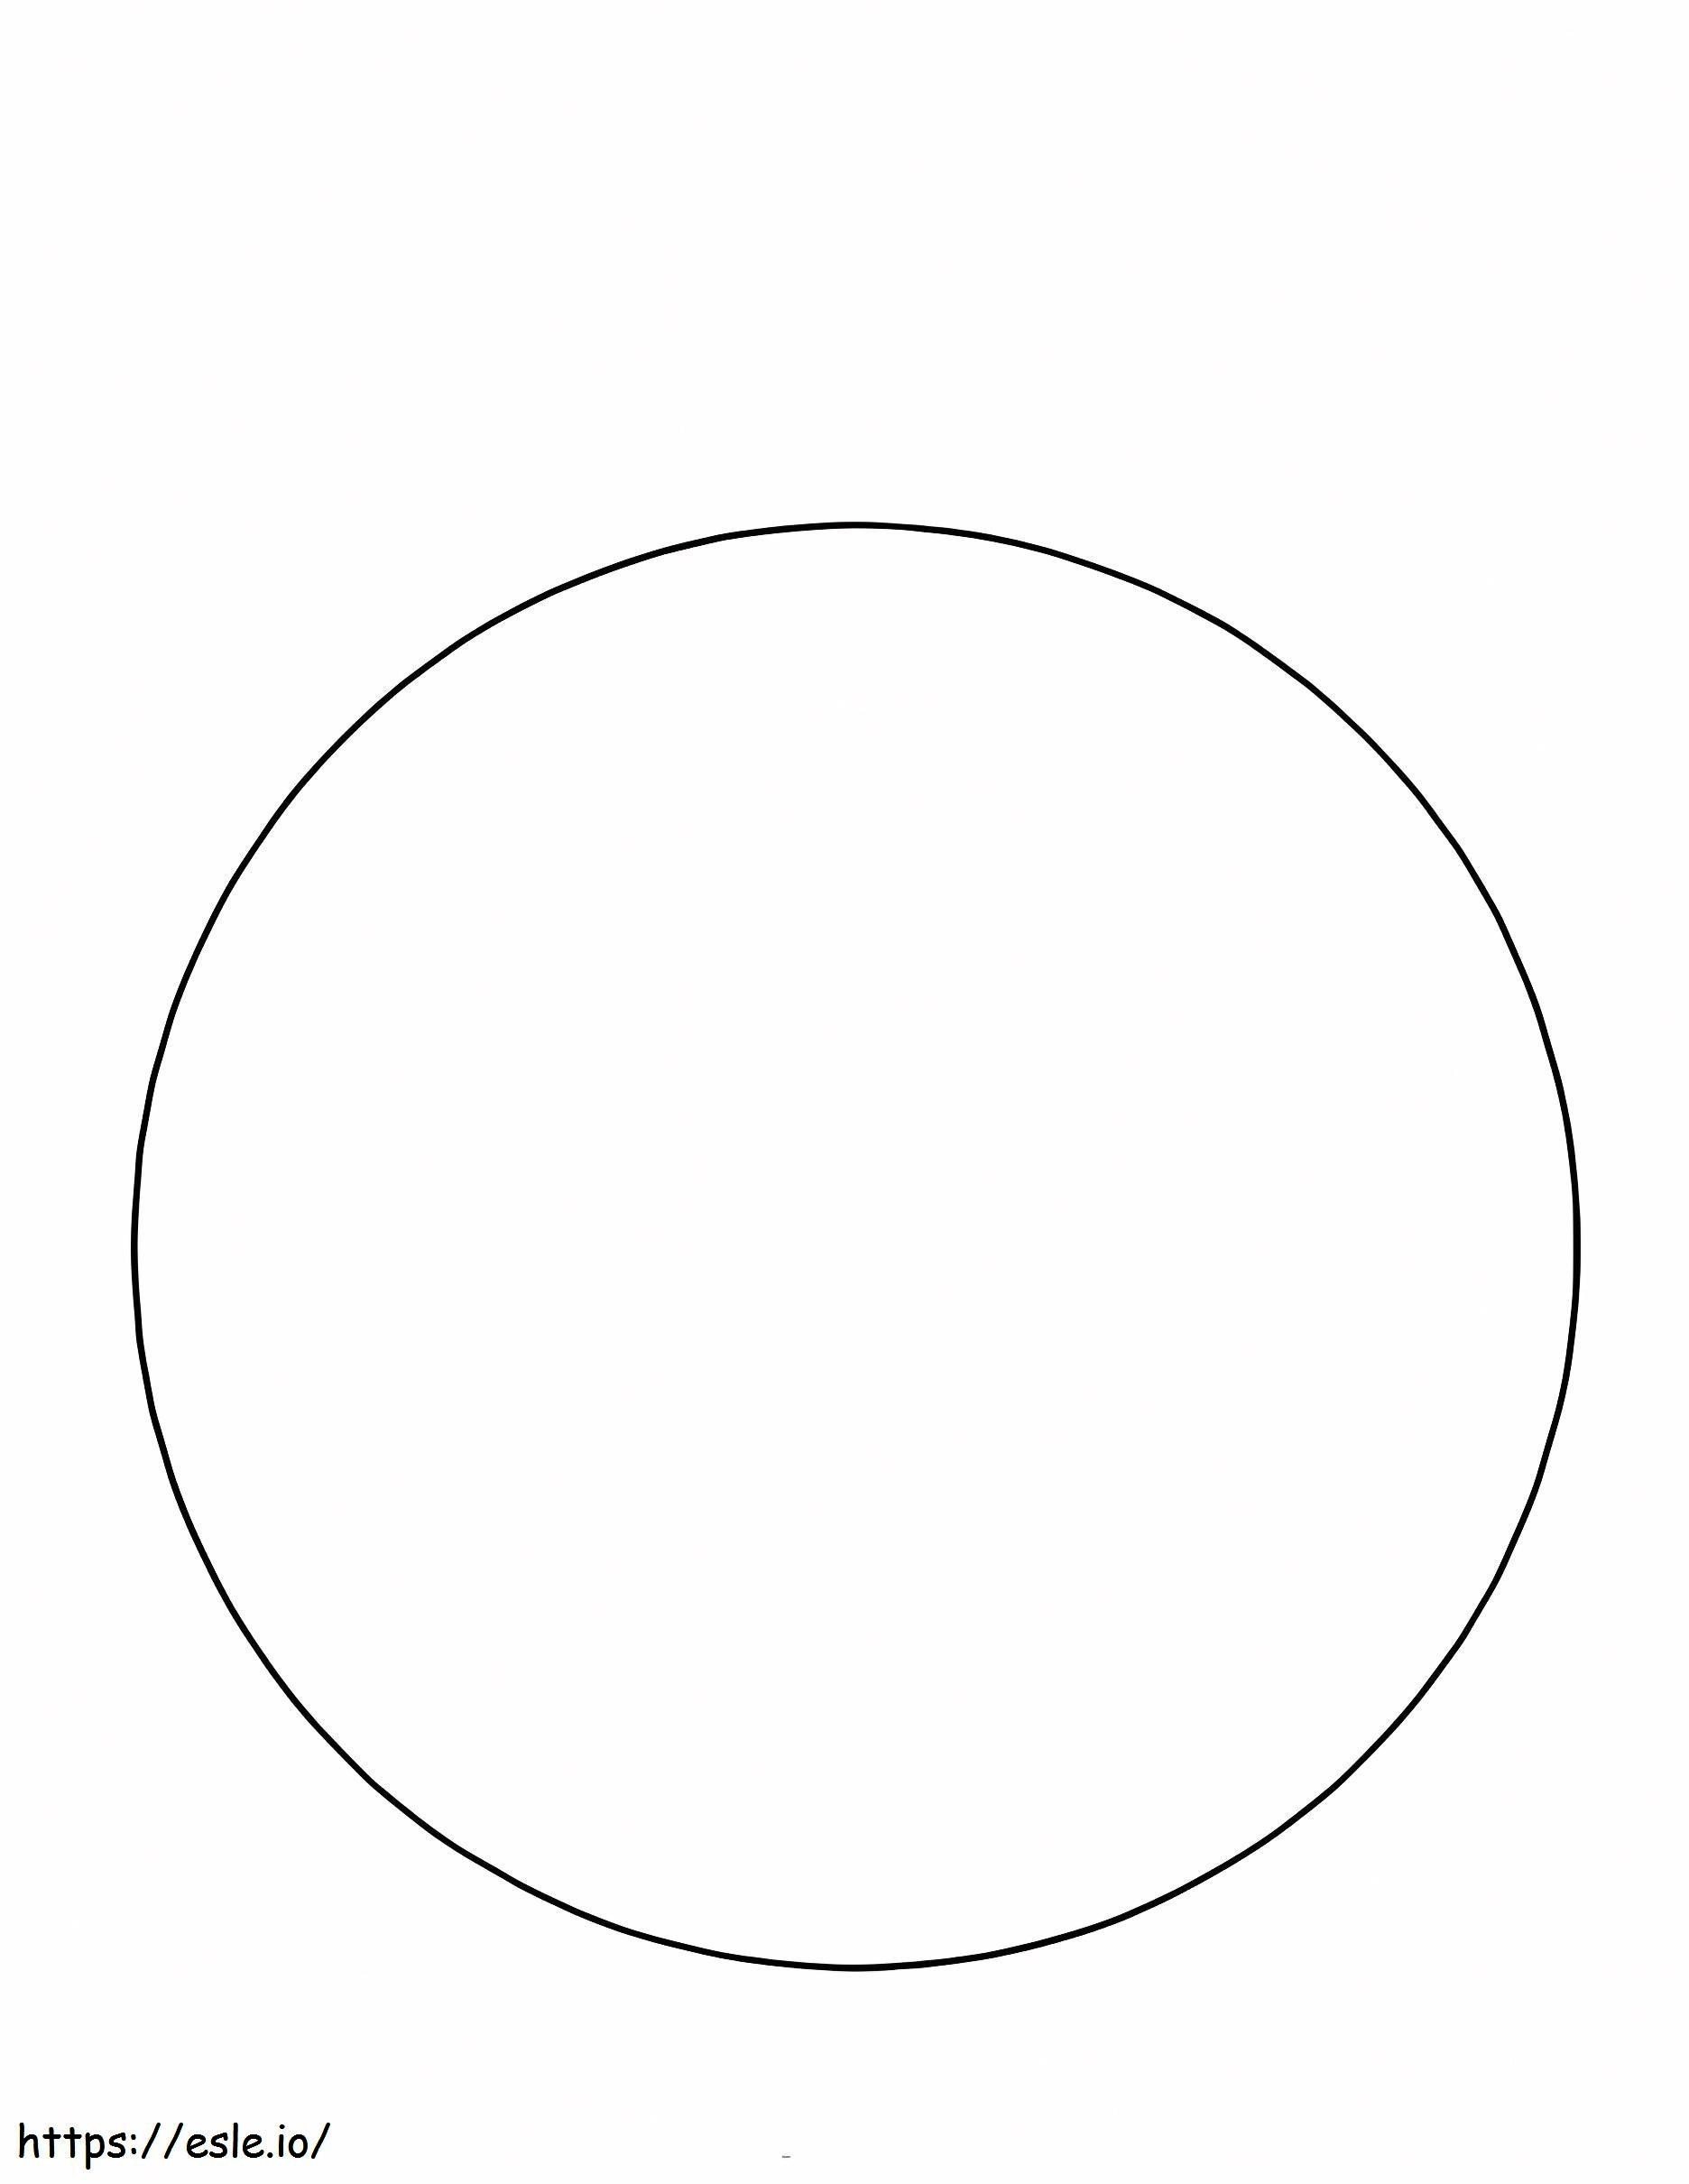 Simple Circle coloring page